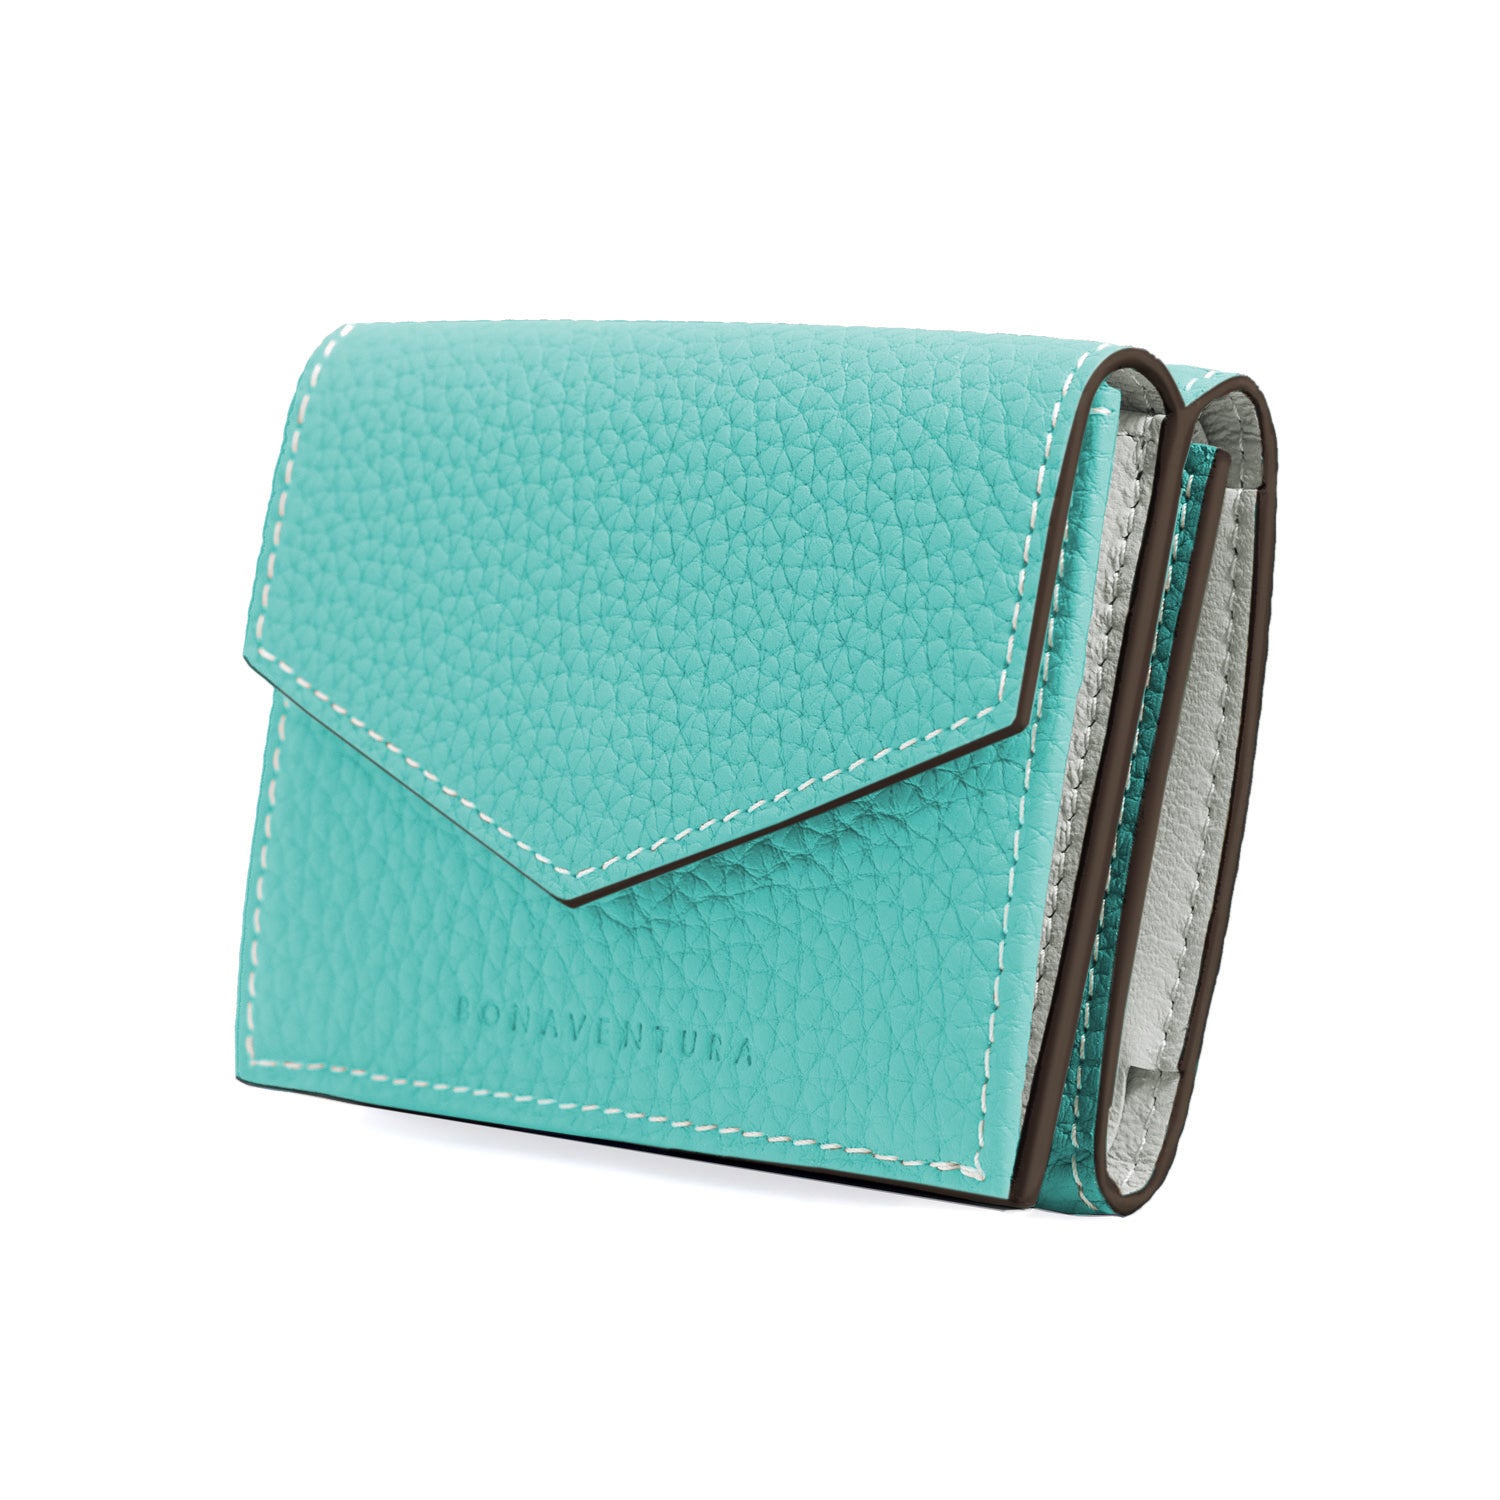 Small Wallet in Shrink Leather